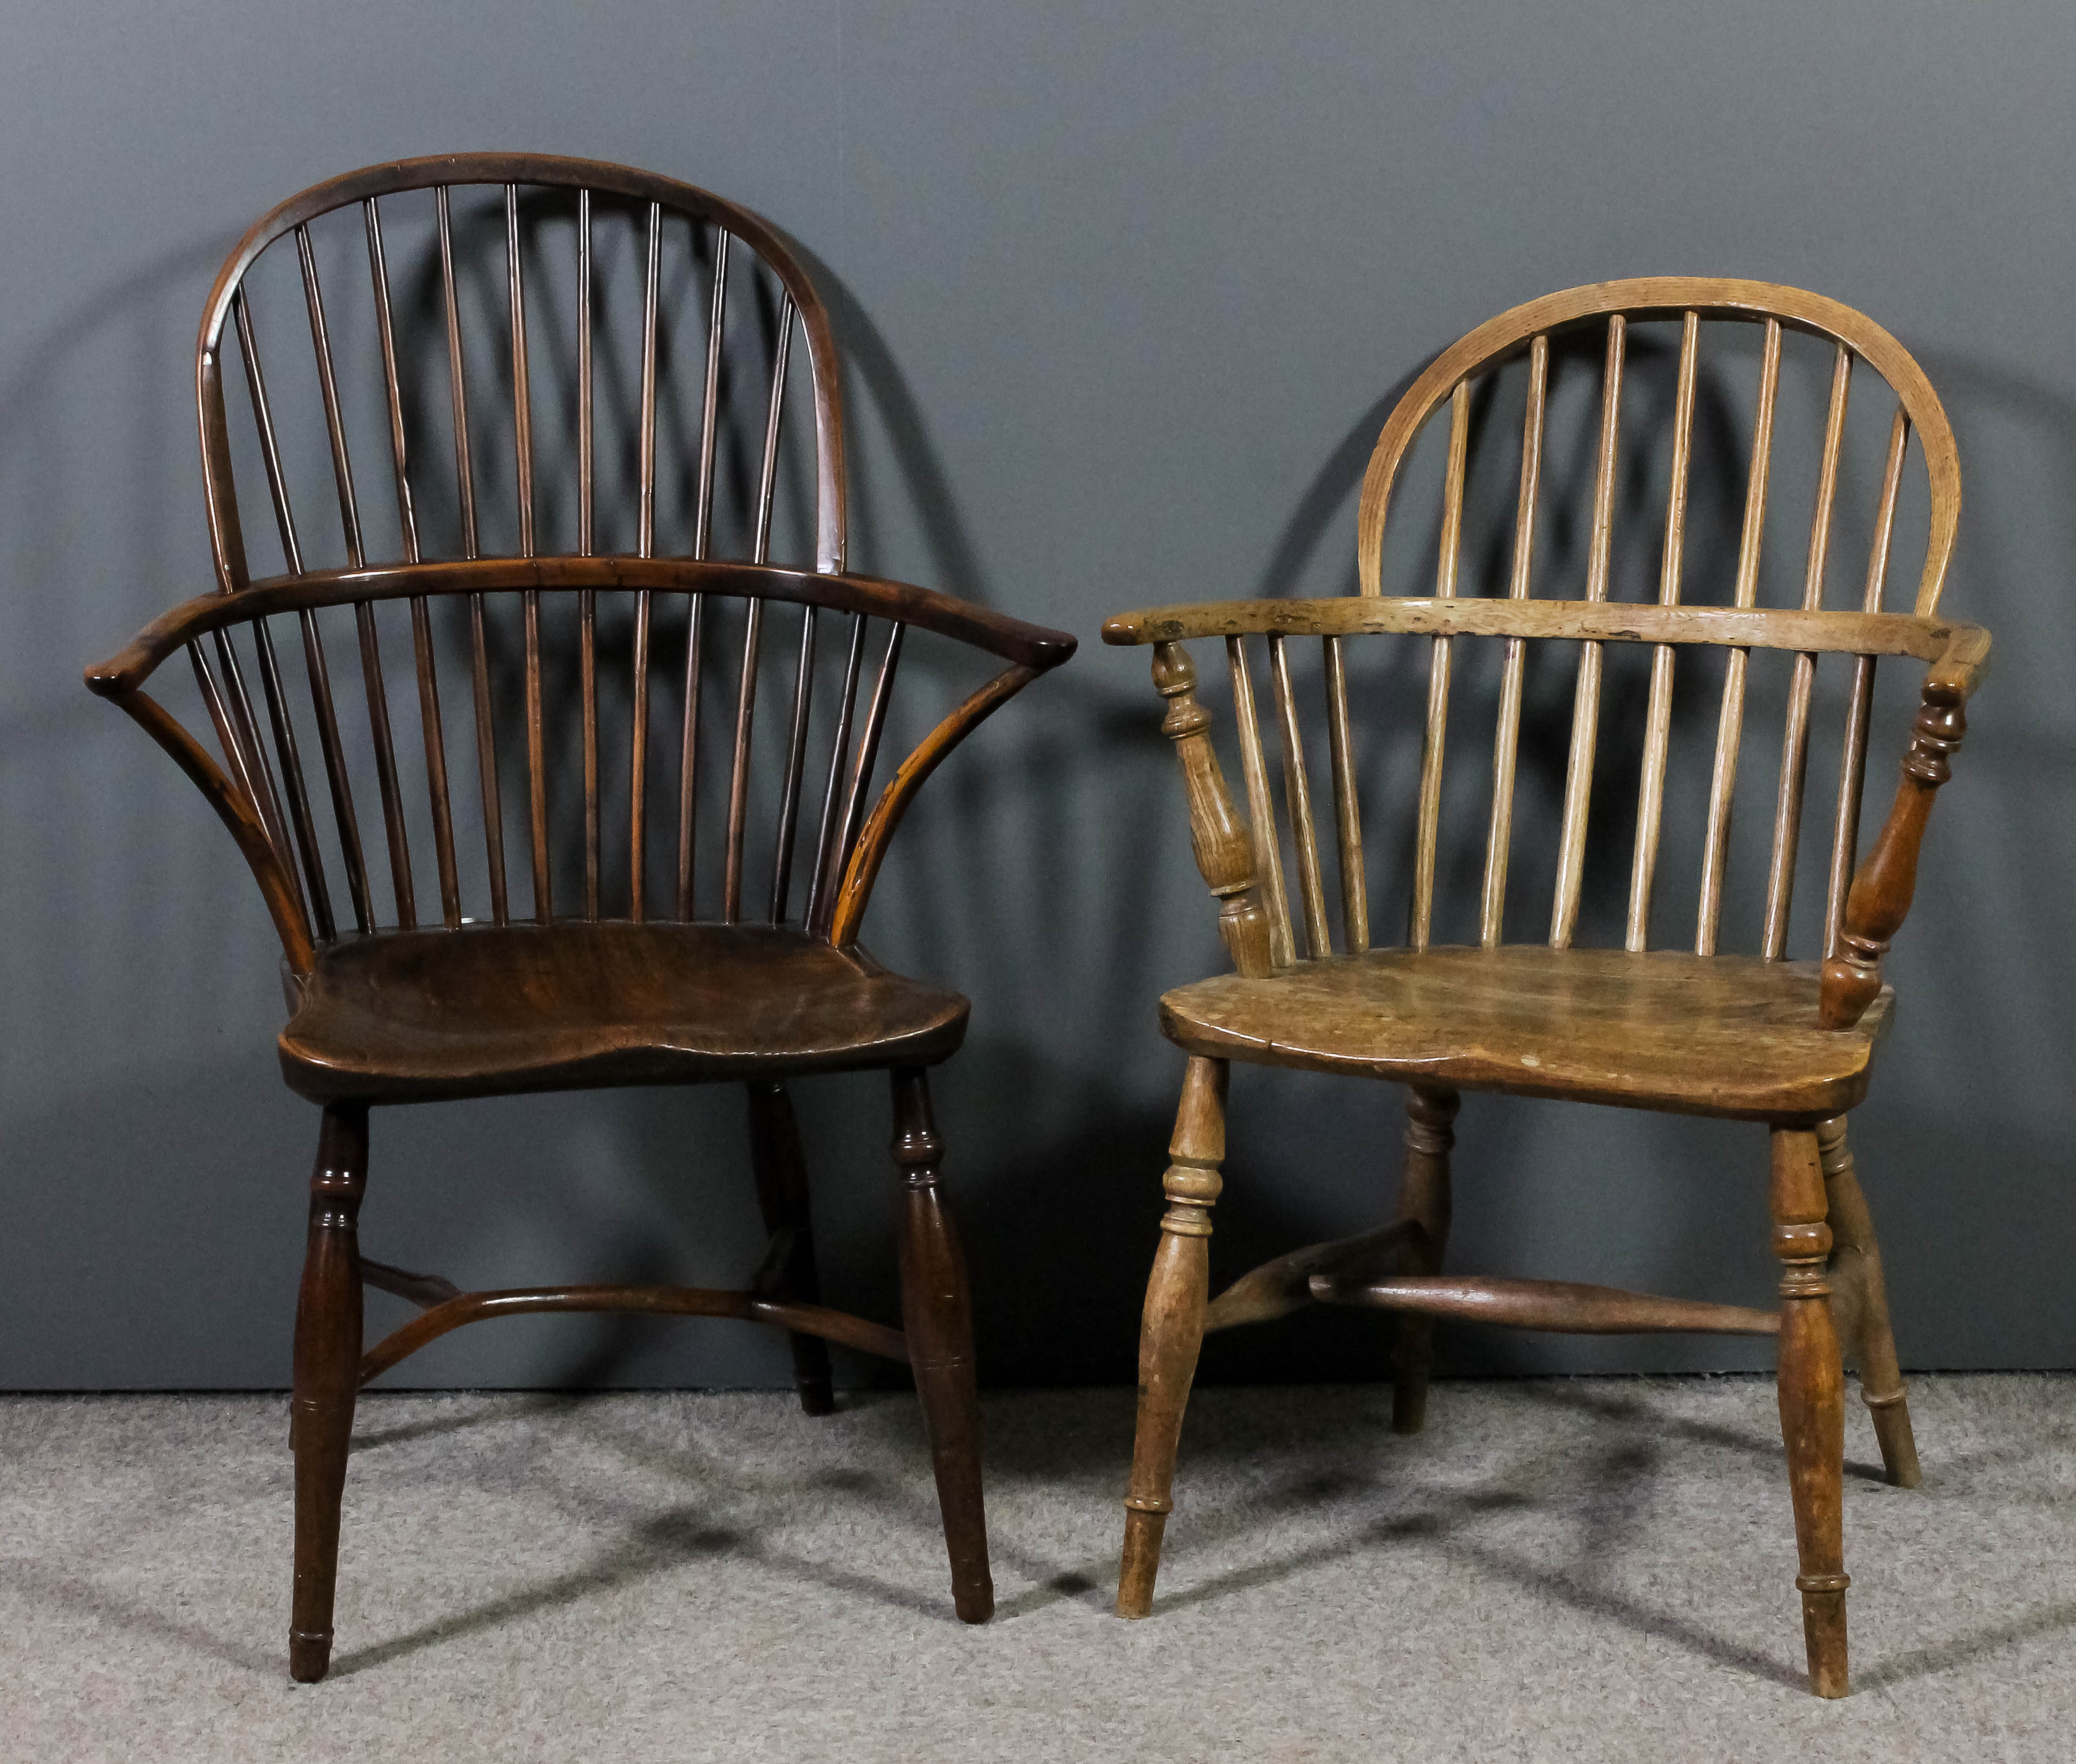 A 19th Century yewwood and elm seated stick back Windsor armchair with two tier back, on turned